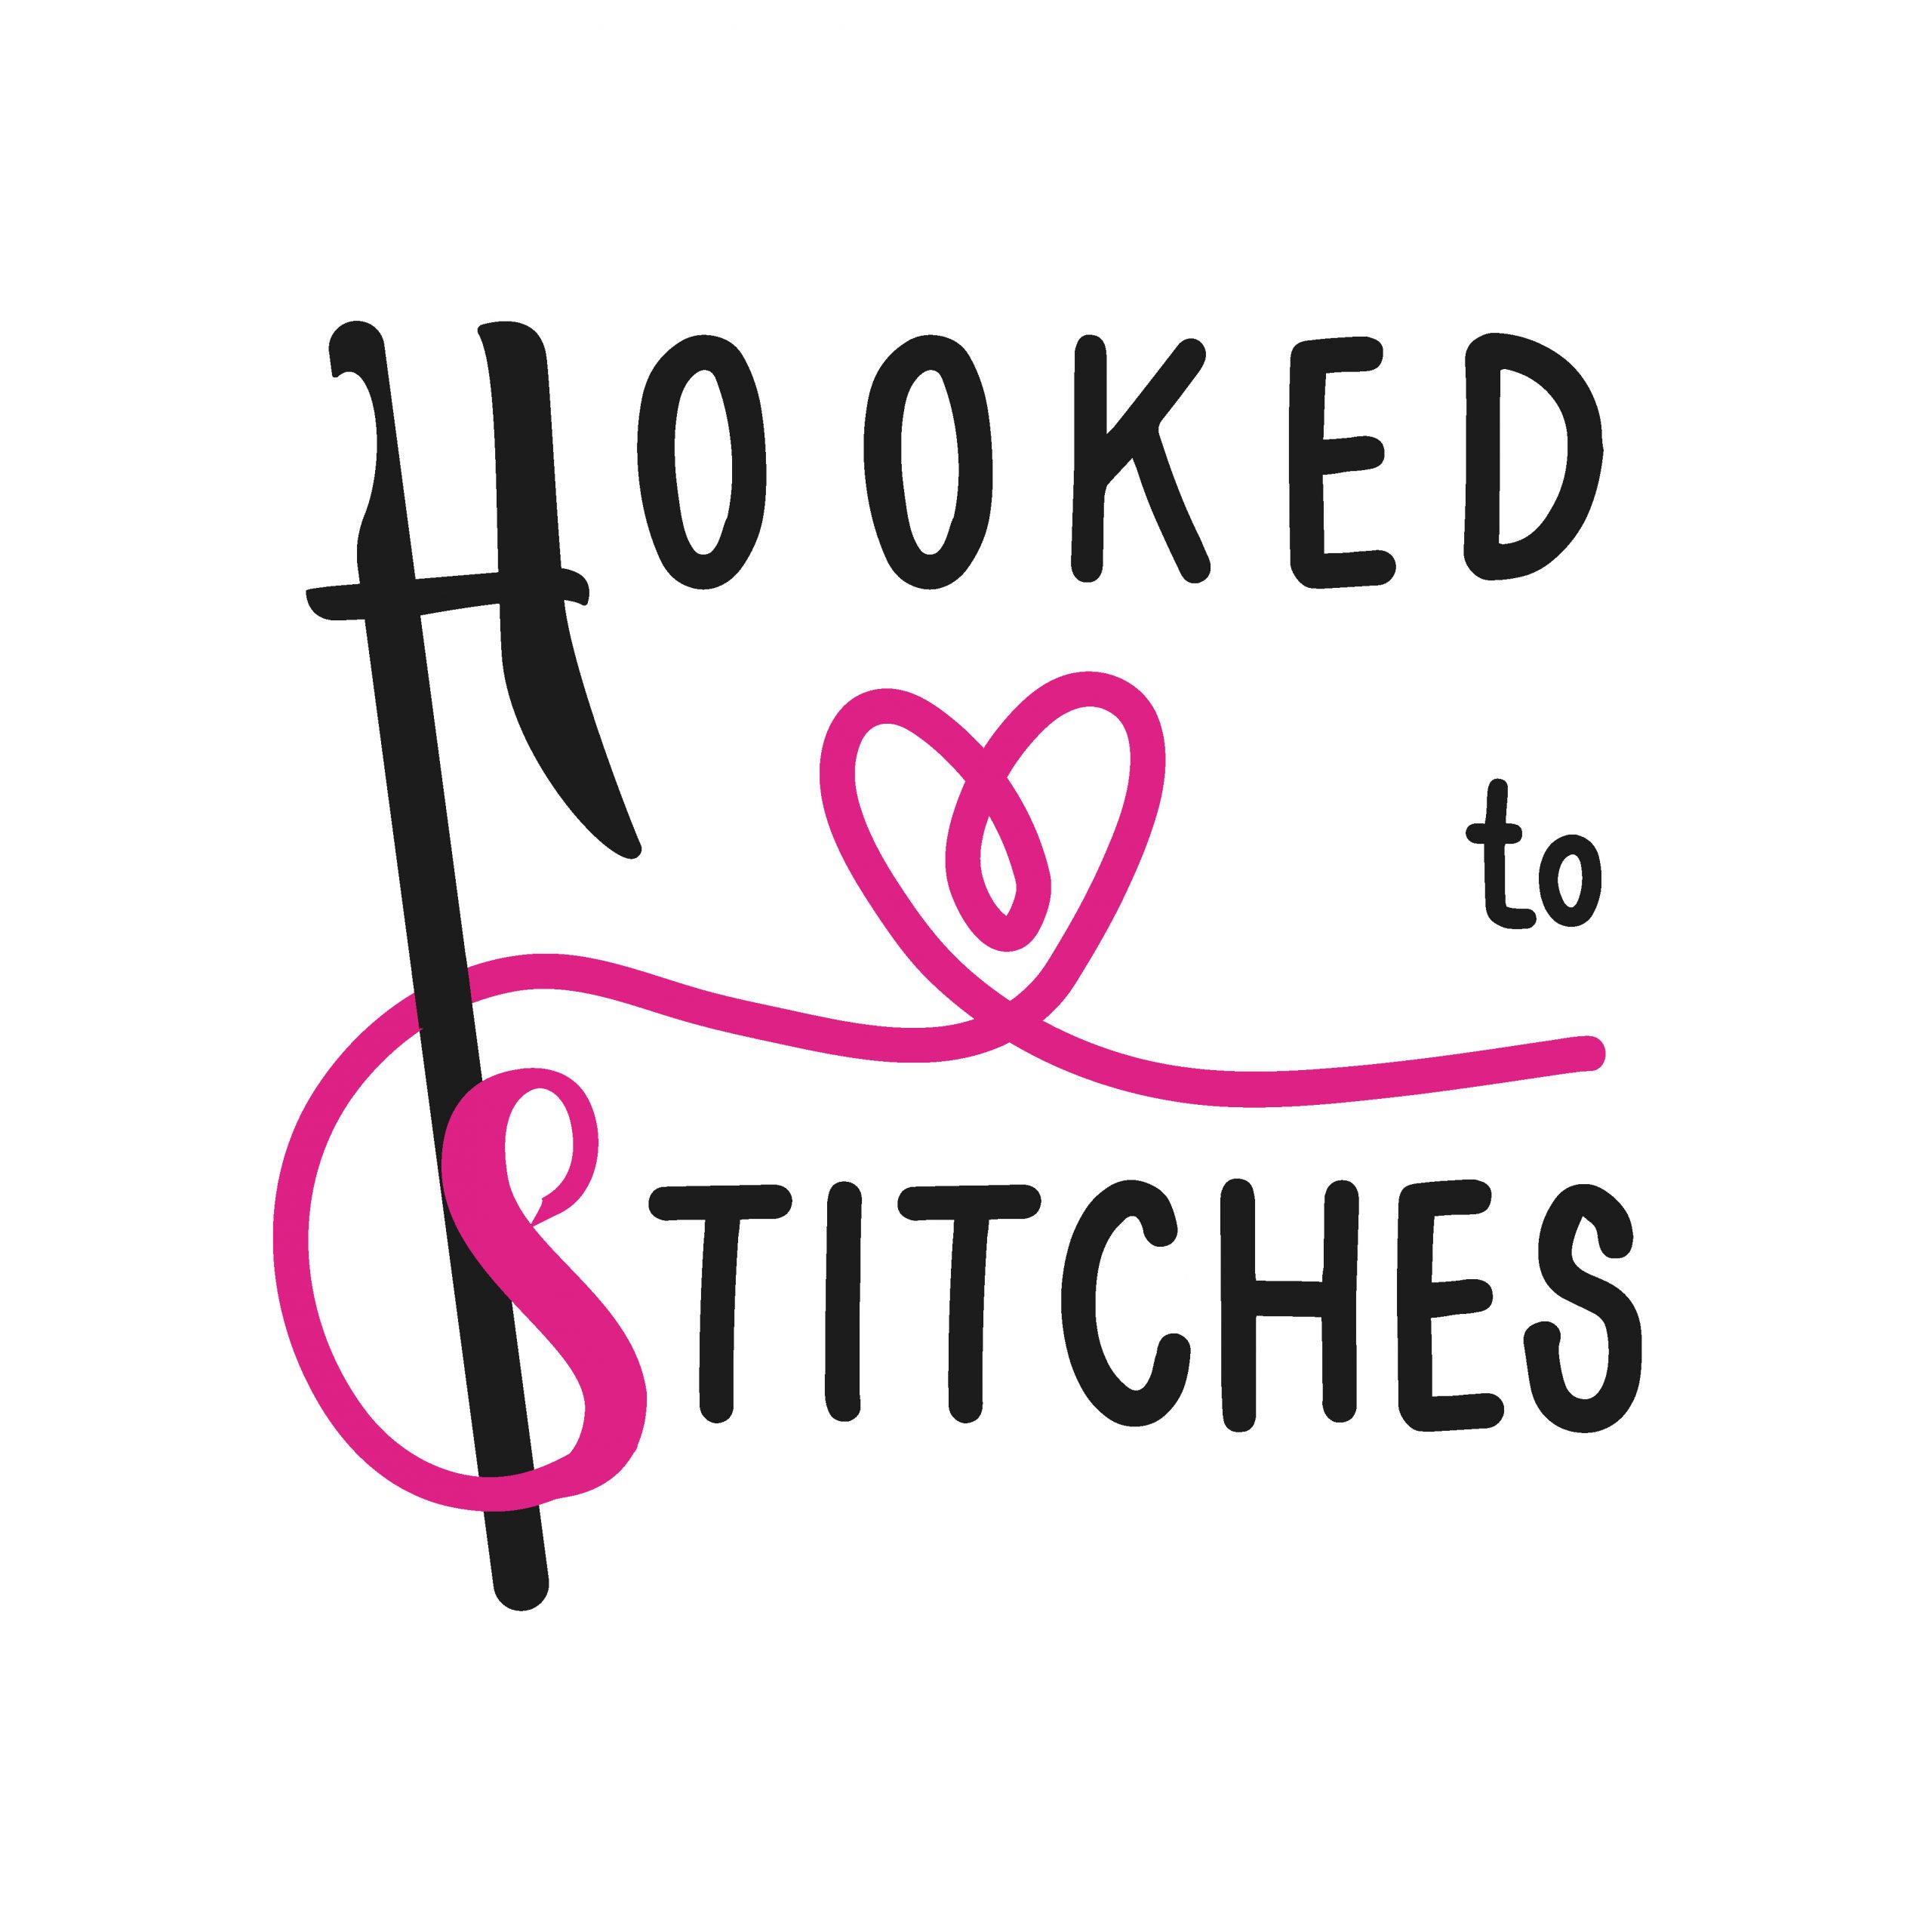 Hooked to Stitches